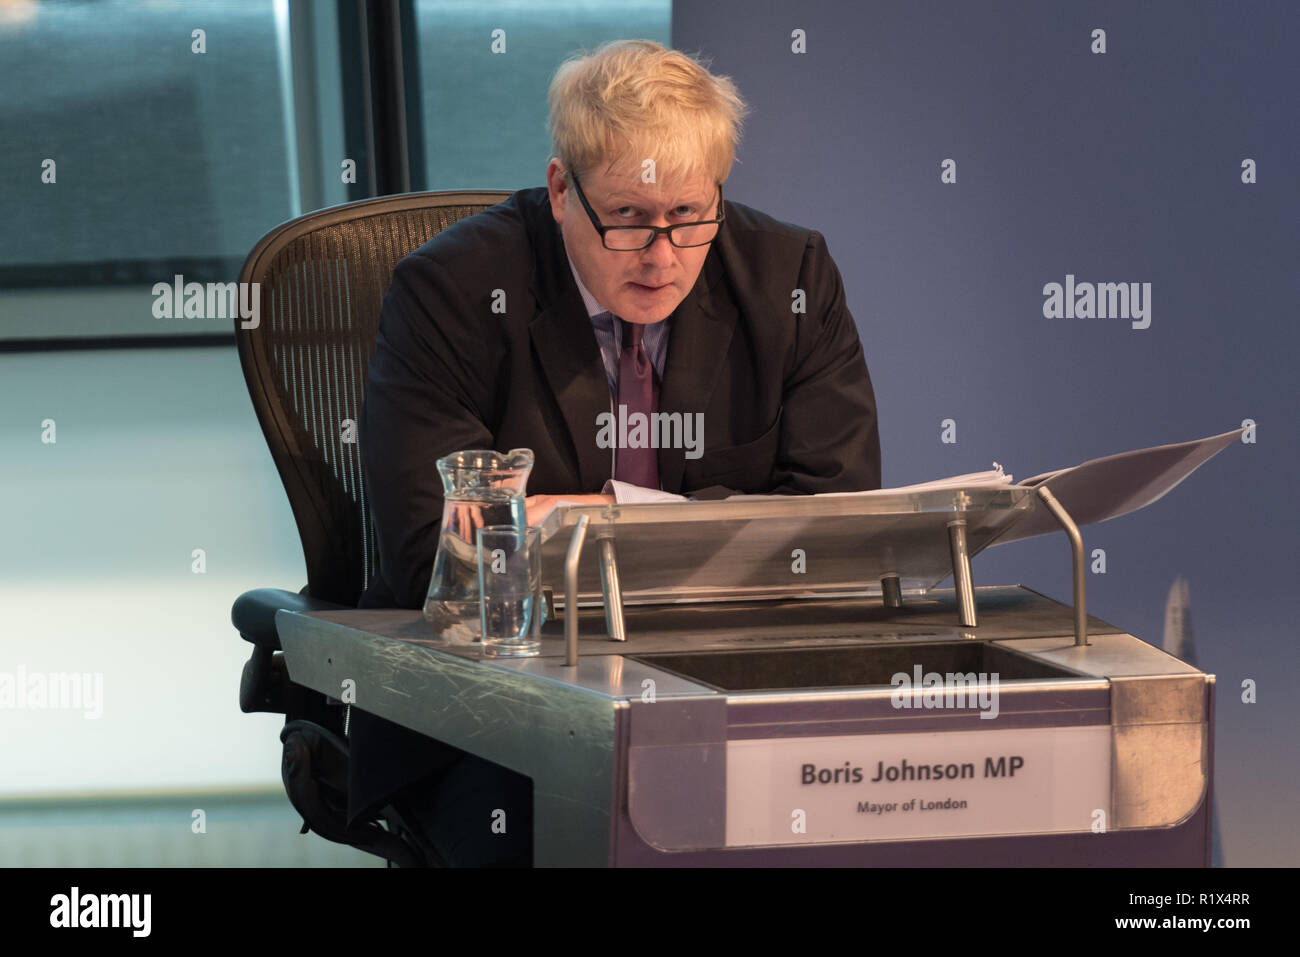 The Chamber at City Hall, The Queen’s Walk, London, UK. 22nd February, 2016. The current Mayor of London, Boris Johnson, presents his last £16 billion Stock Photo